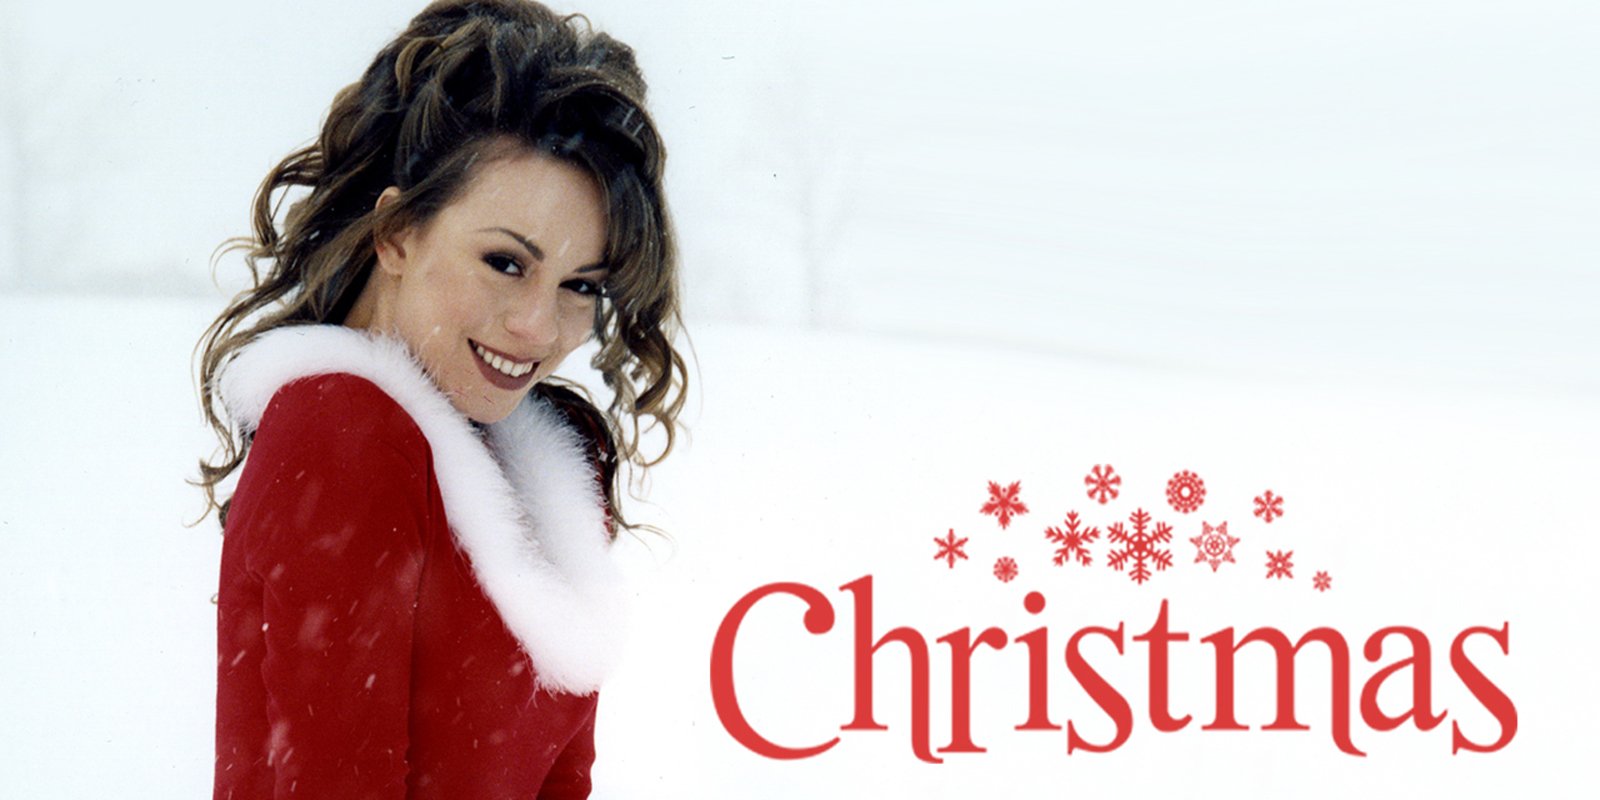 Mariah Carey: All I Want For Christmas Is You